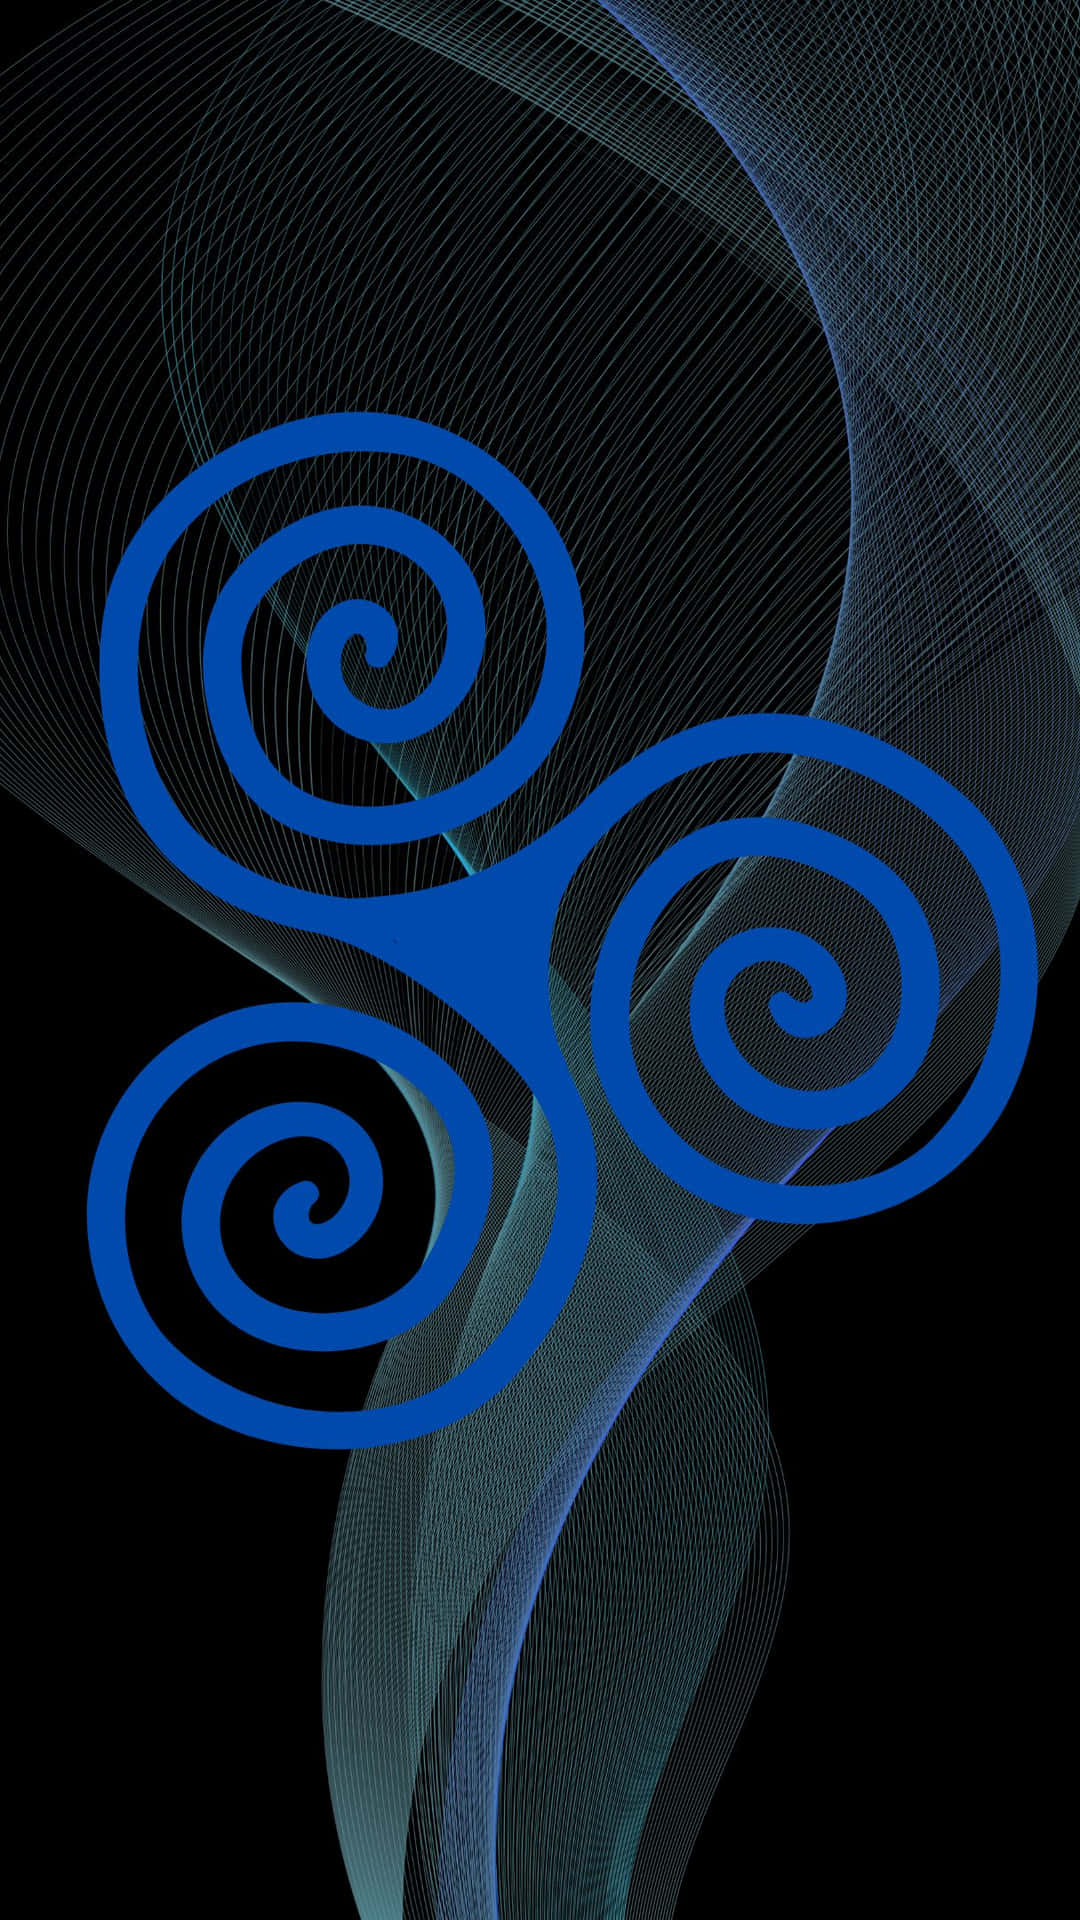 "Beautiful abstract blue swirl pattern for any background."